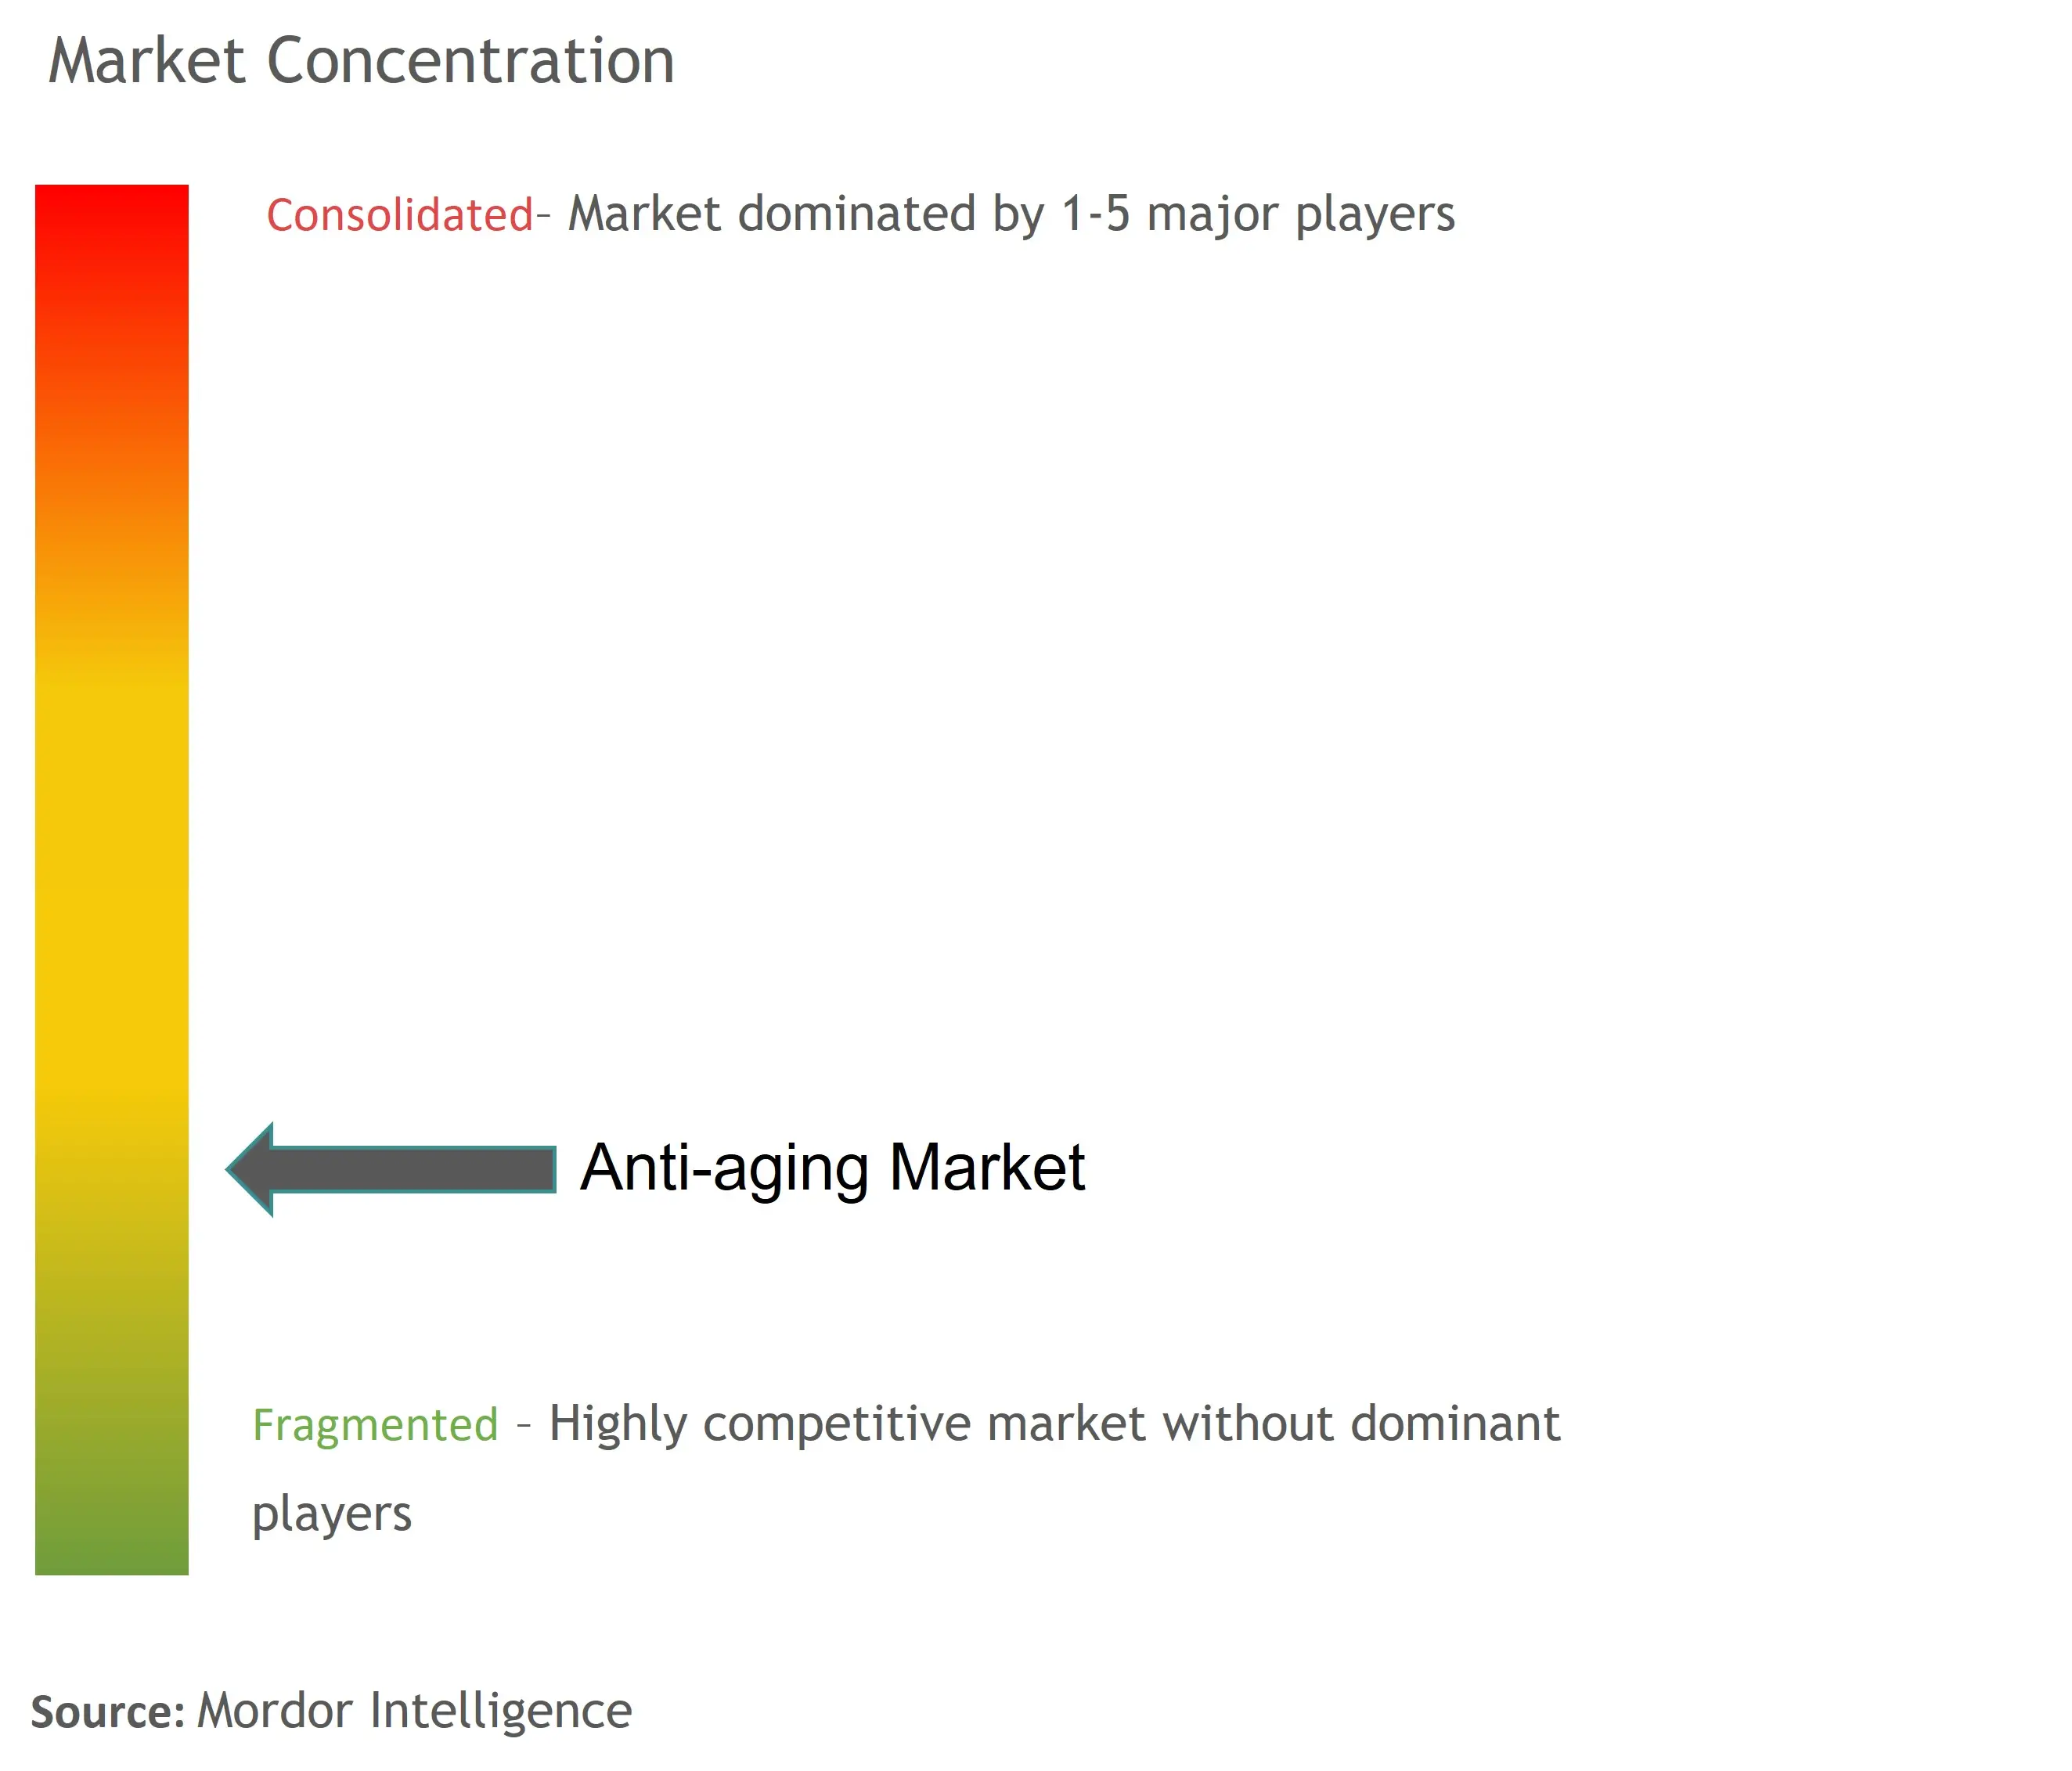 Anti-aging Market Concentration